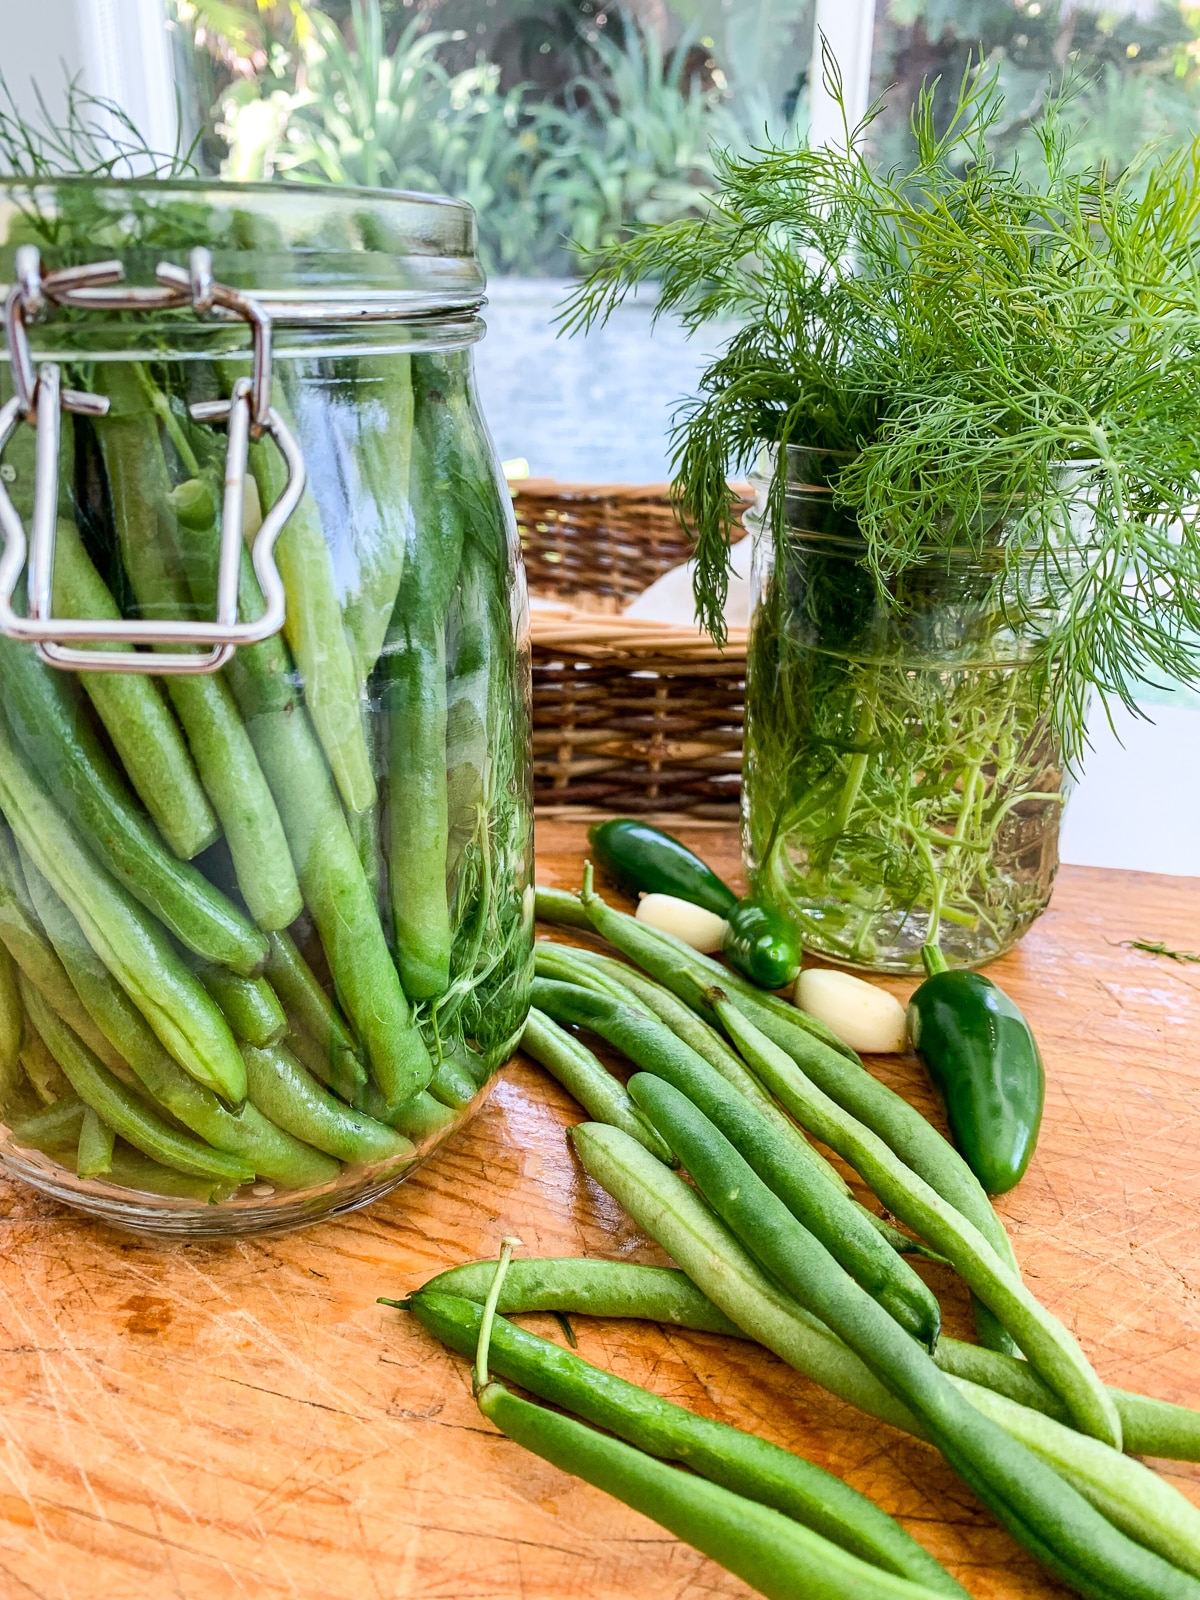 A clear clamp jar filled with pickled green beans and ingredients on a cutting board.